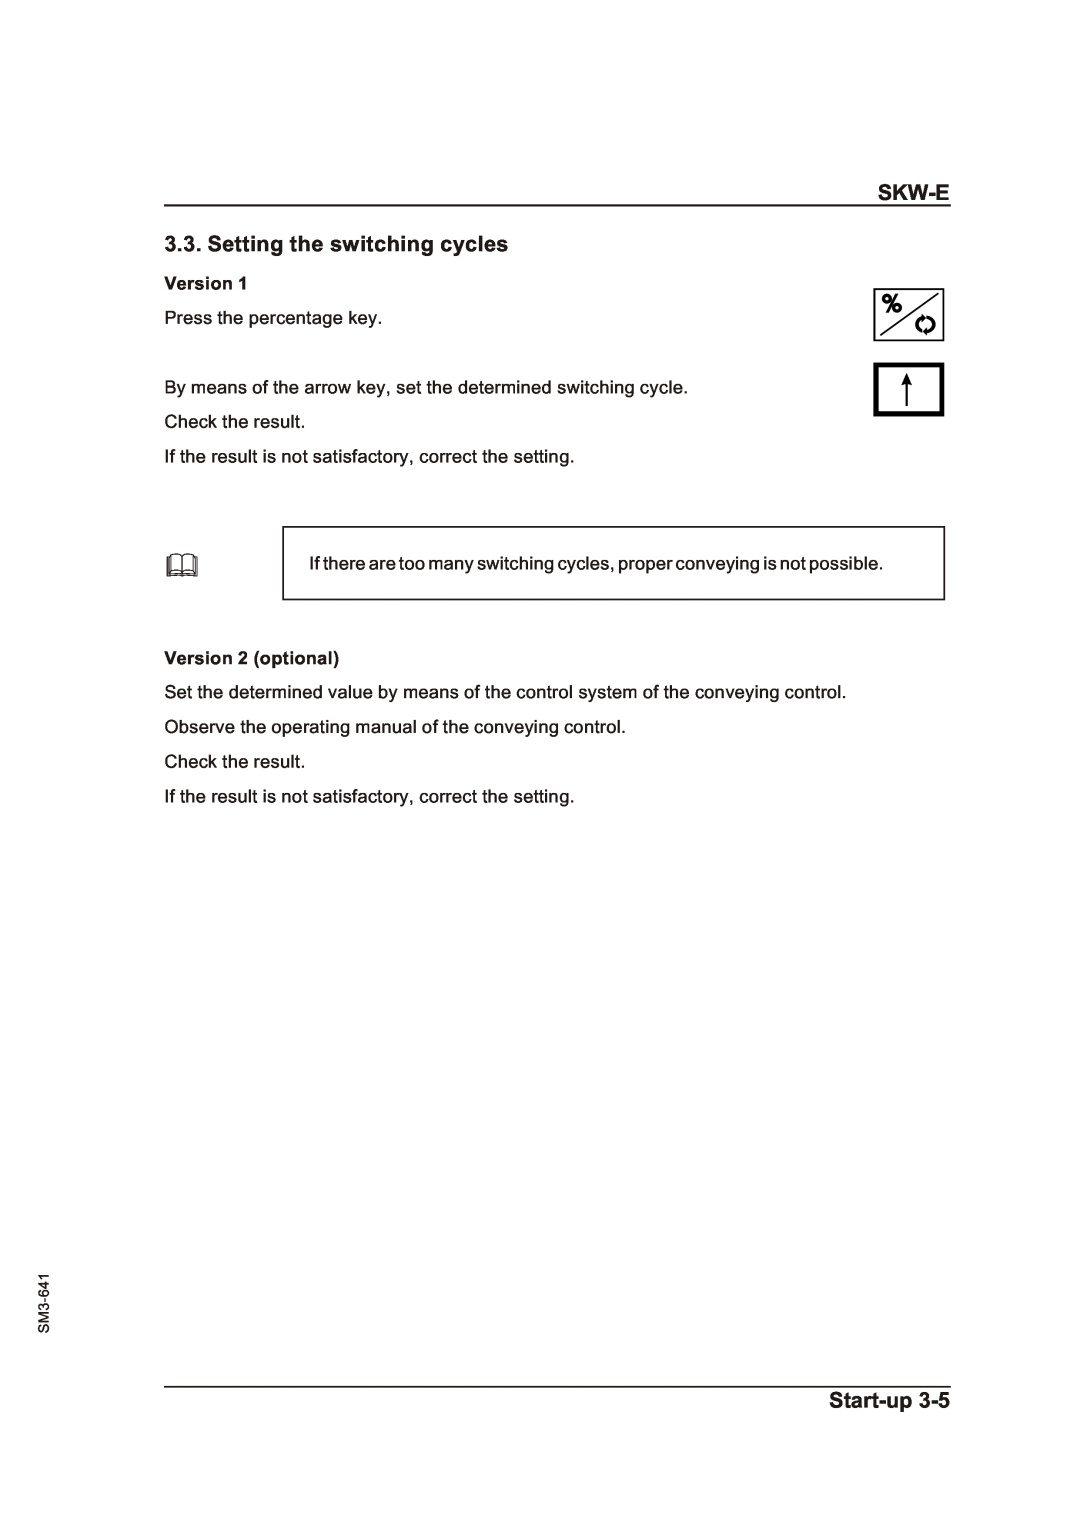 Sterling Plumbing manual SKW-E 3.3. Setting the switching cycles, Start-up 